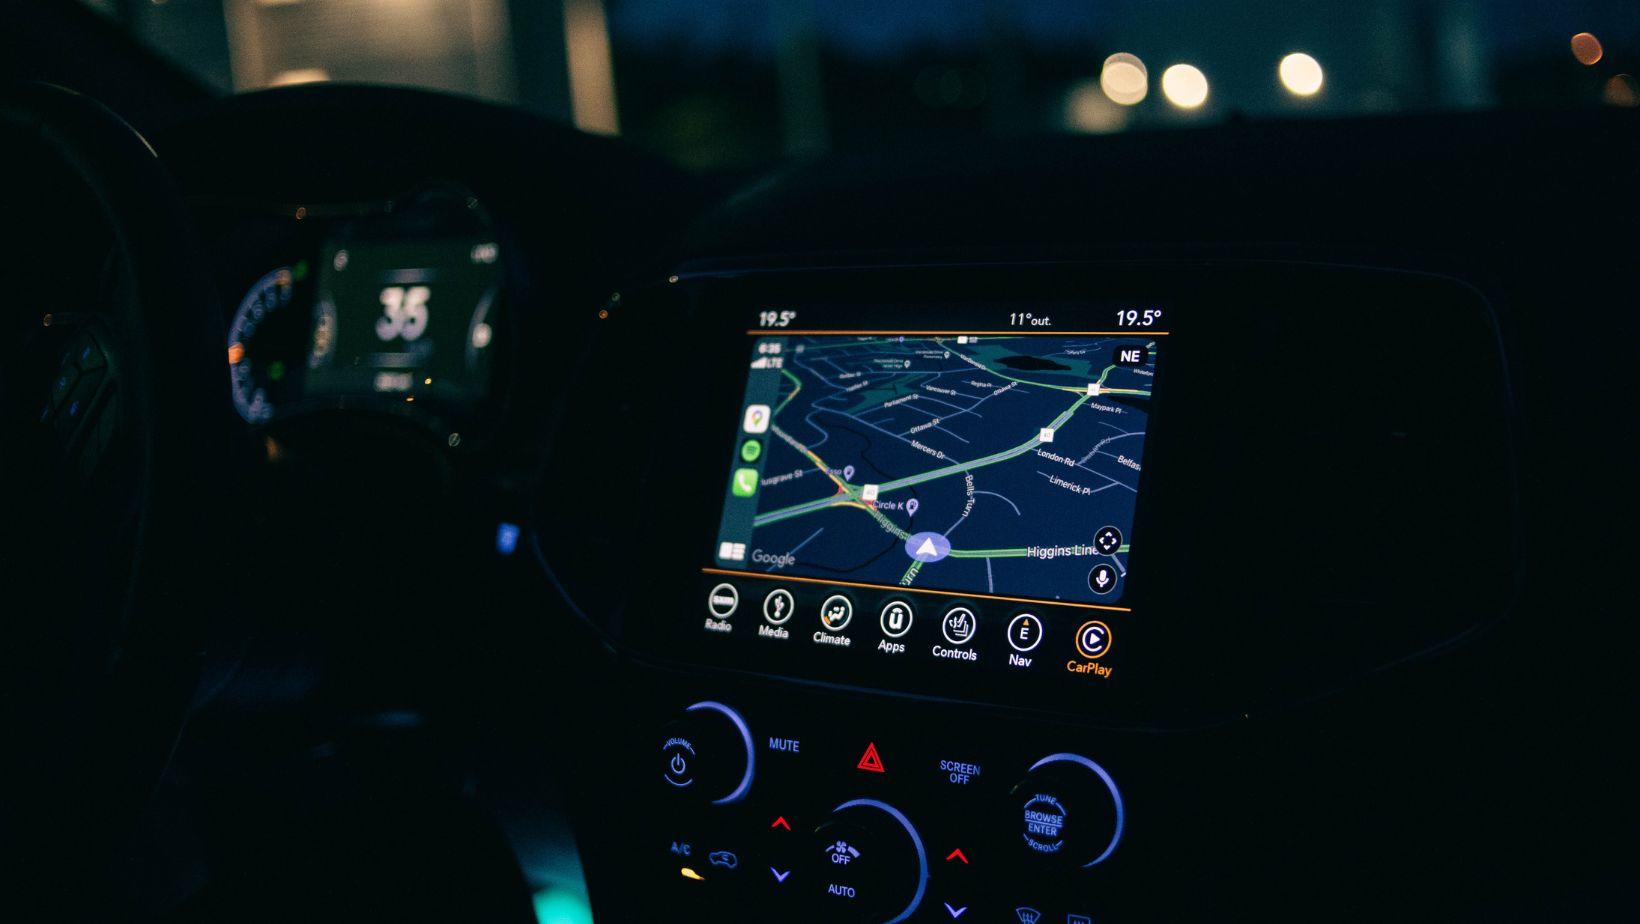 Are GPS devices legal?